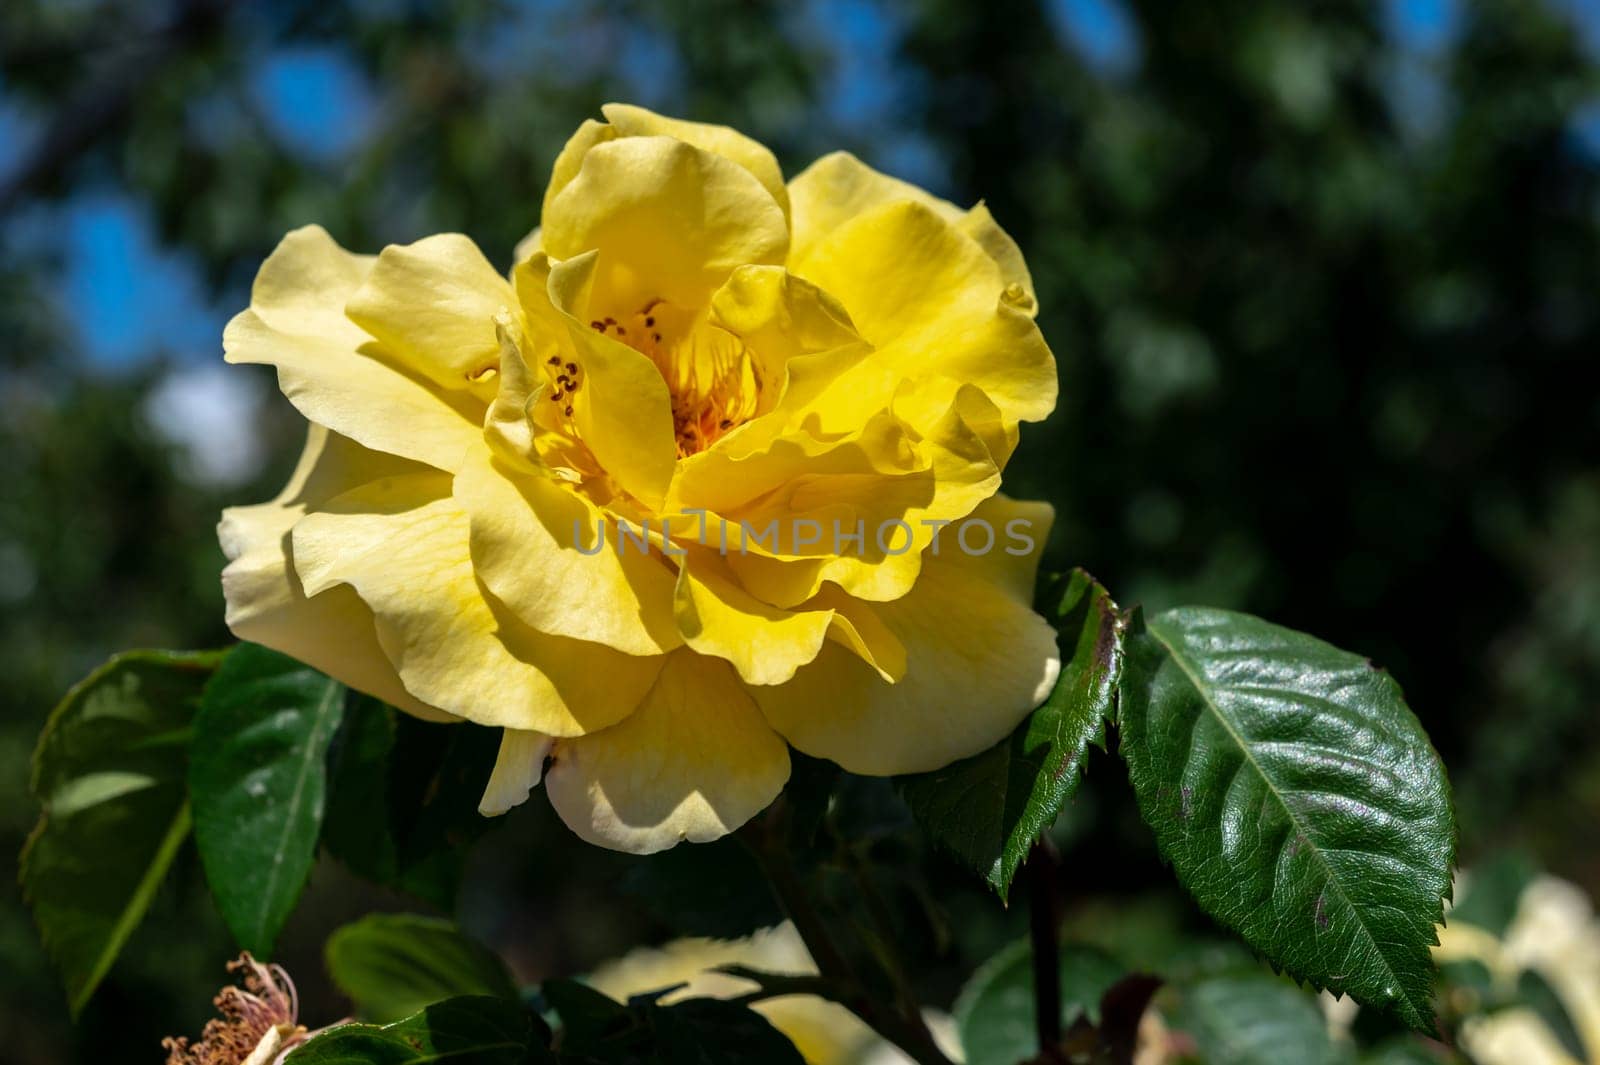 Blooming yellow rose on a green leaves background by Multipedia